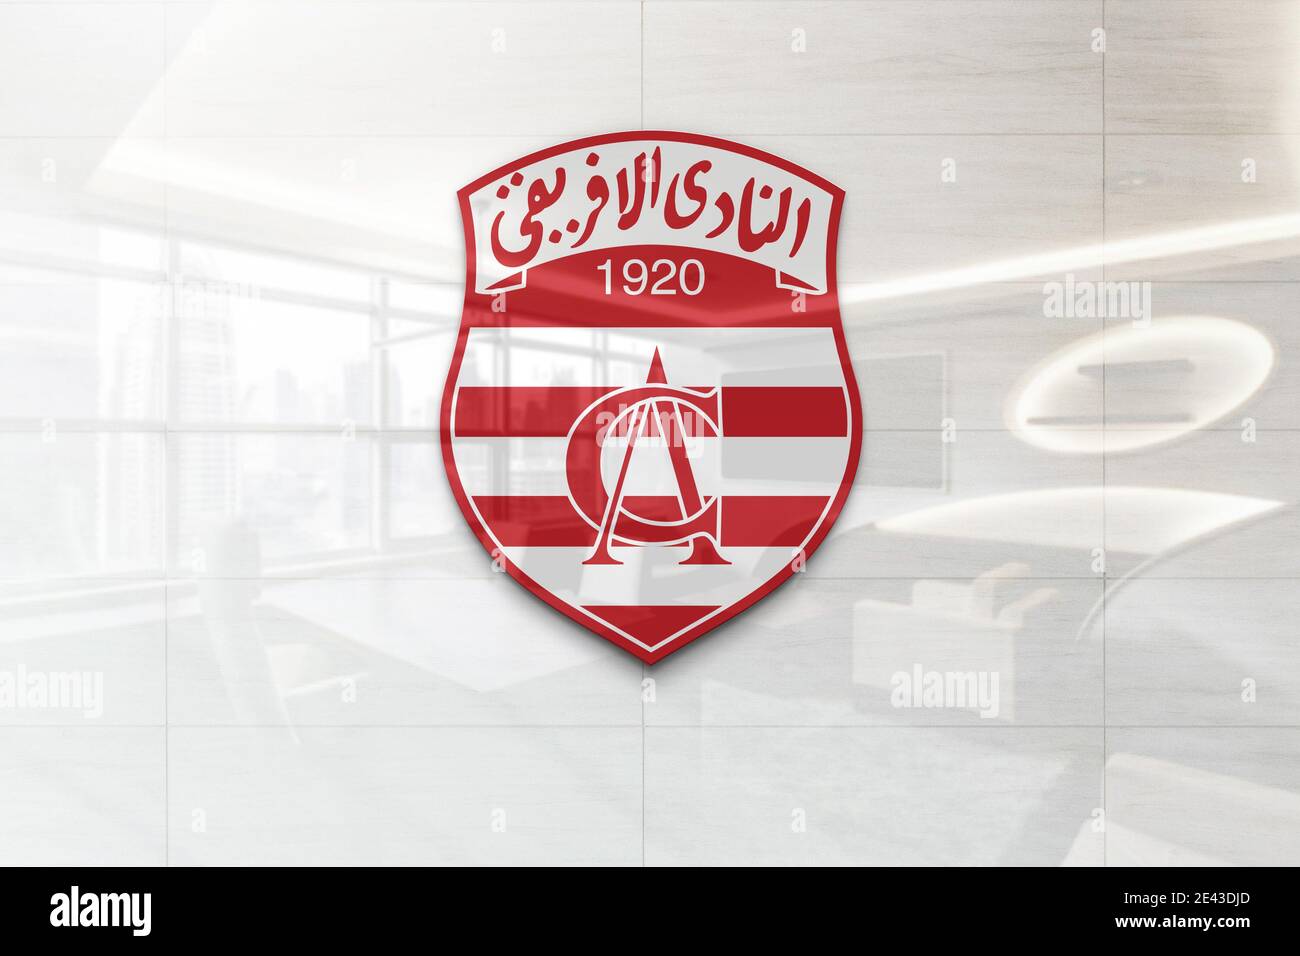 club africain logo on reflective business wall plaque Stock Photo